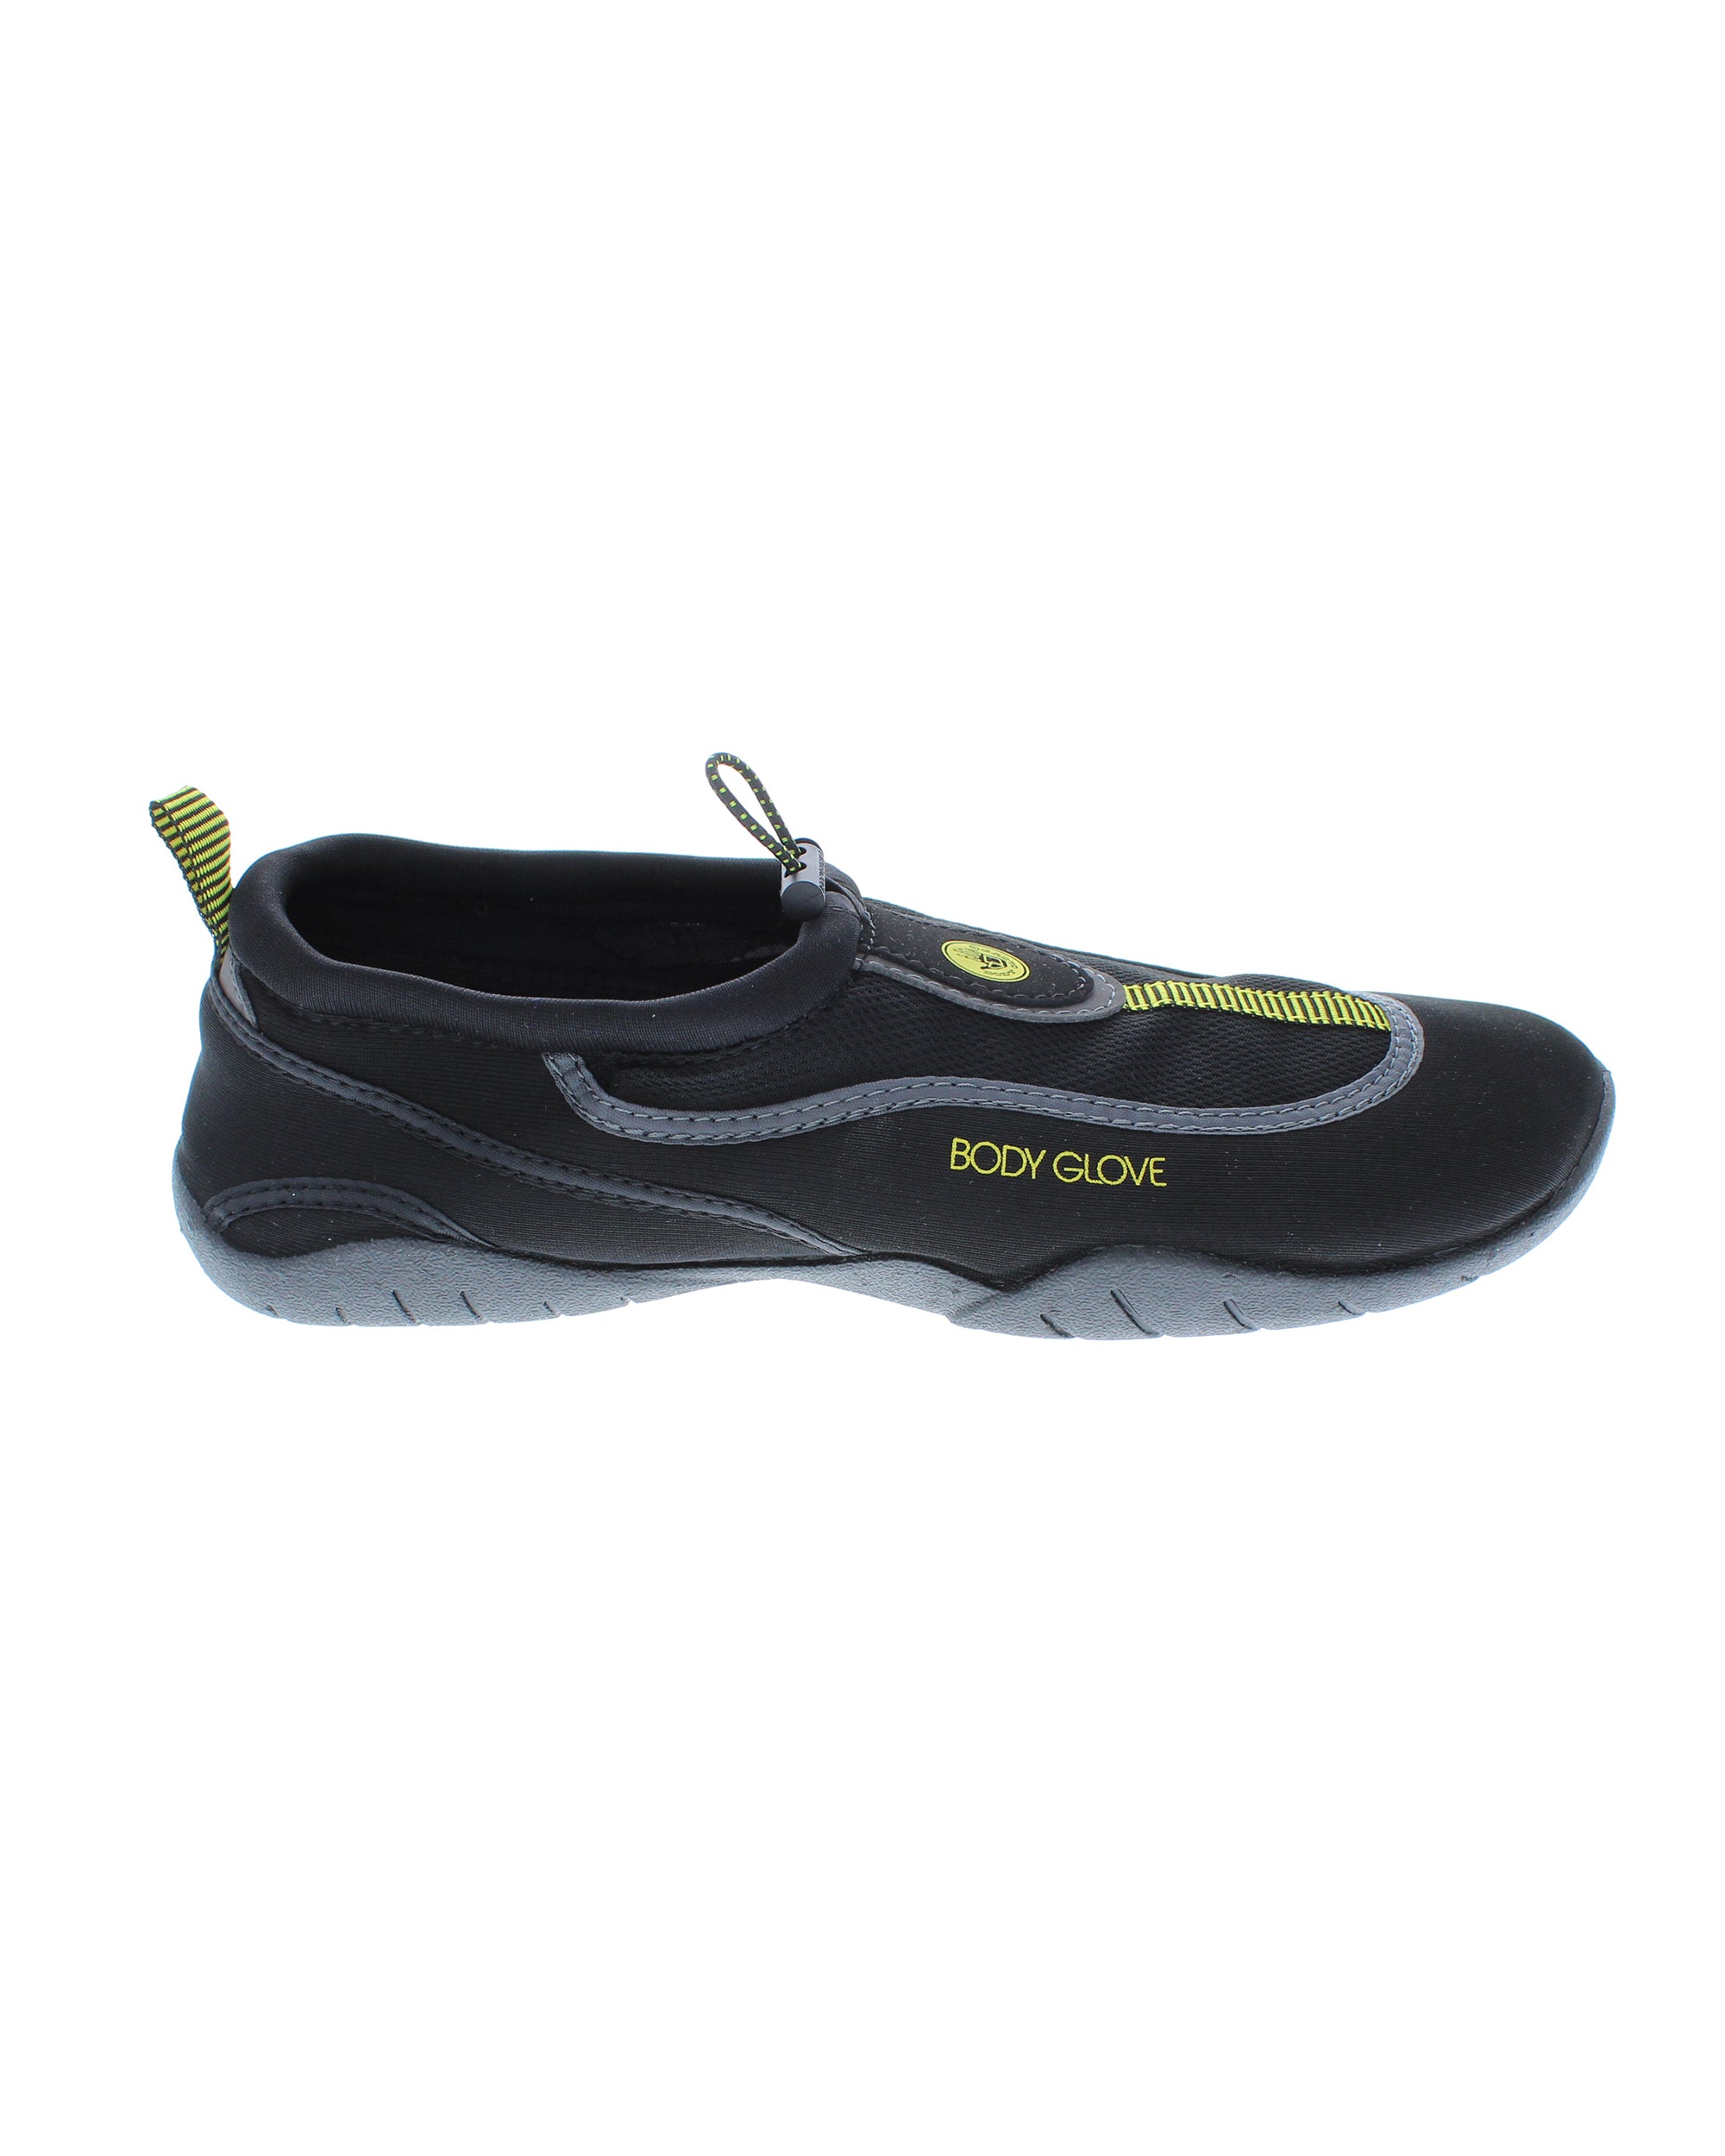 Riptide III Water Shoes - Black/Yellow 